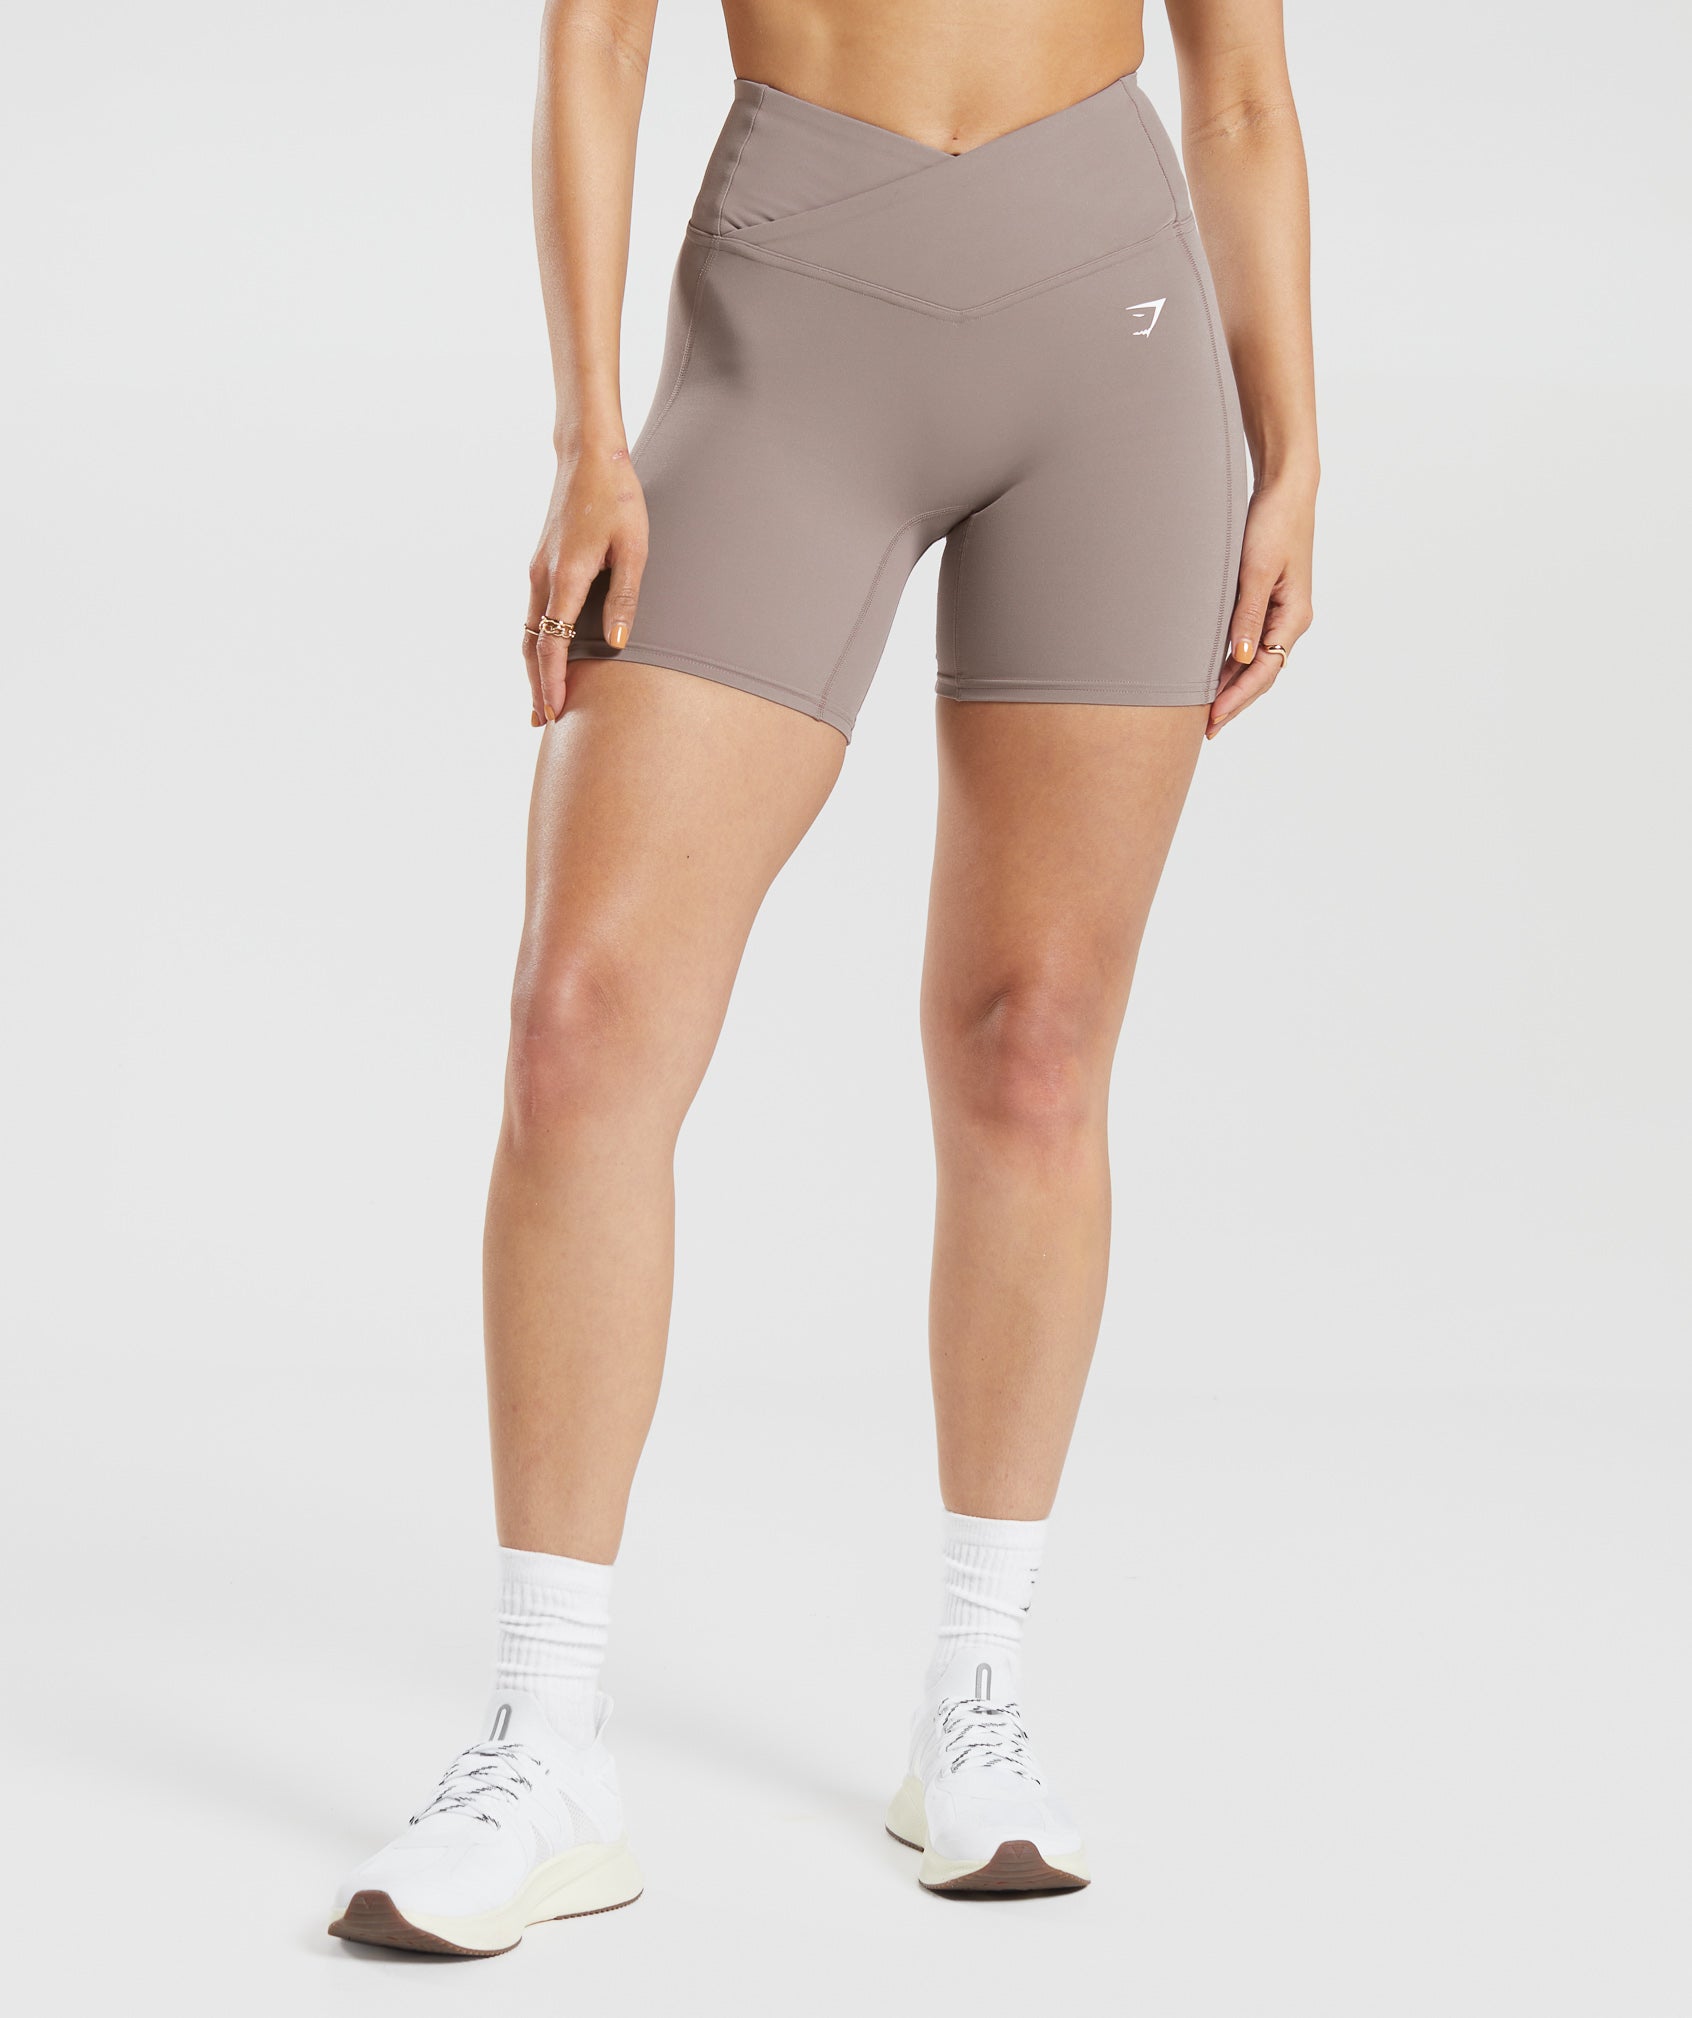 Crossover Shorts in Washed Mauve is out of stock